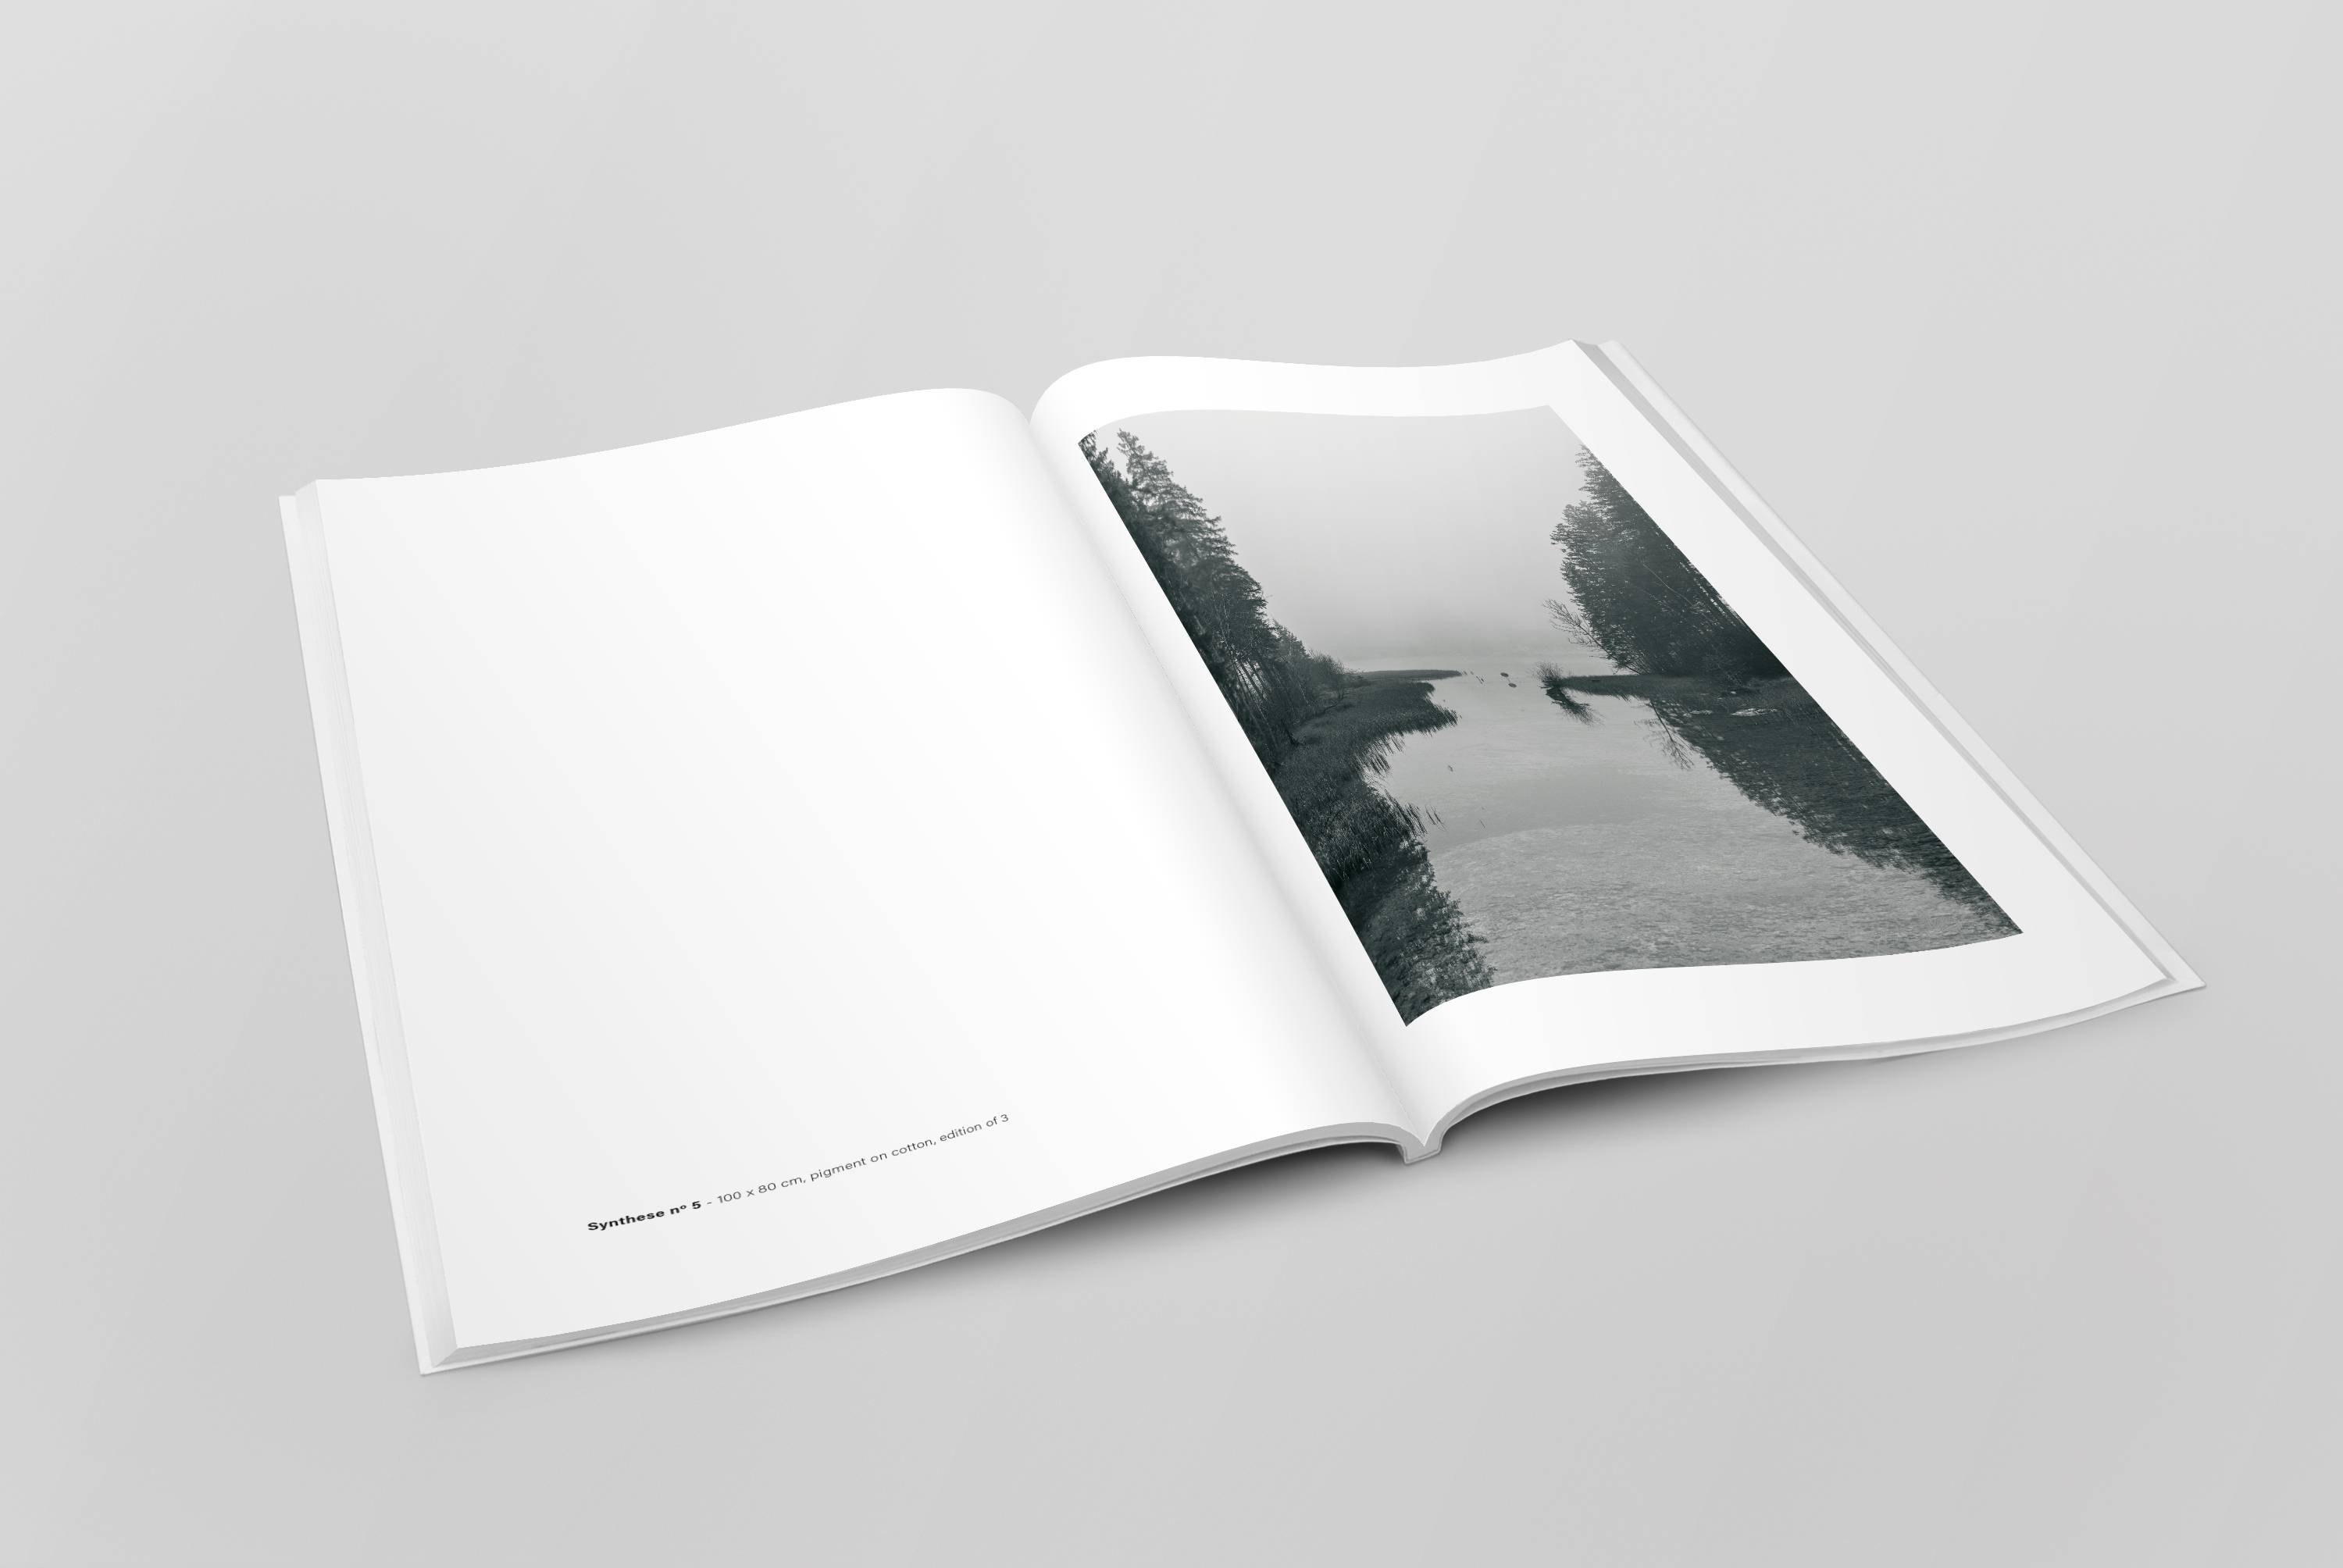 Artbook "Kontemplation" - Photographies Nabil Zitouni - Fotografien in Limited Editions - Contemporary Artworks